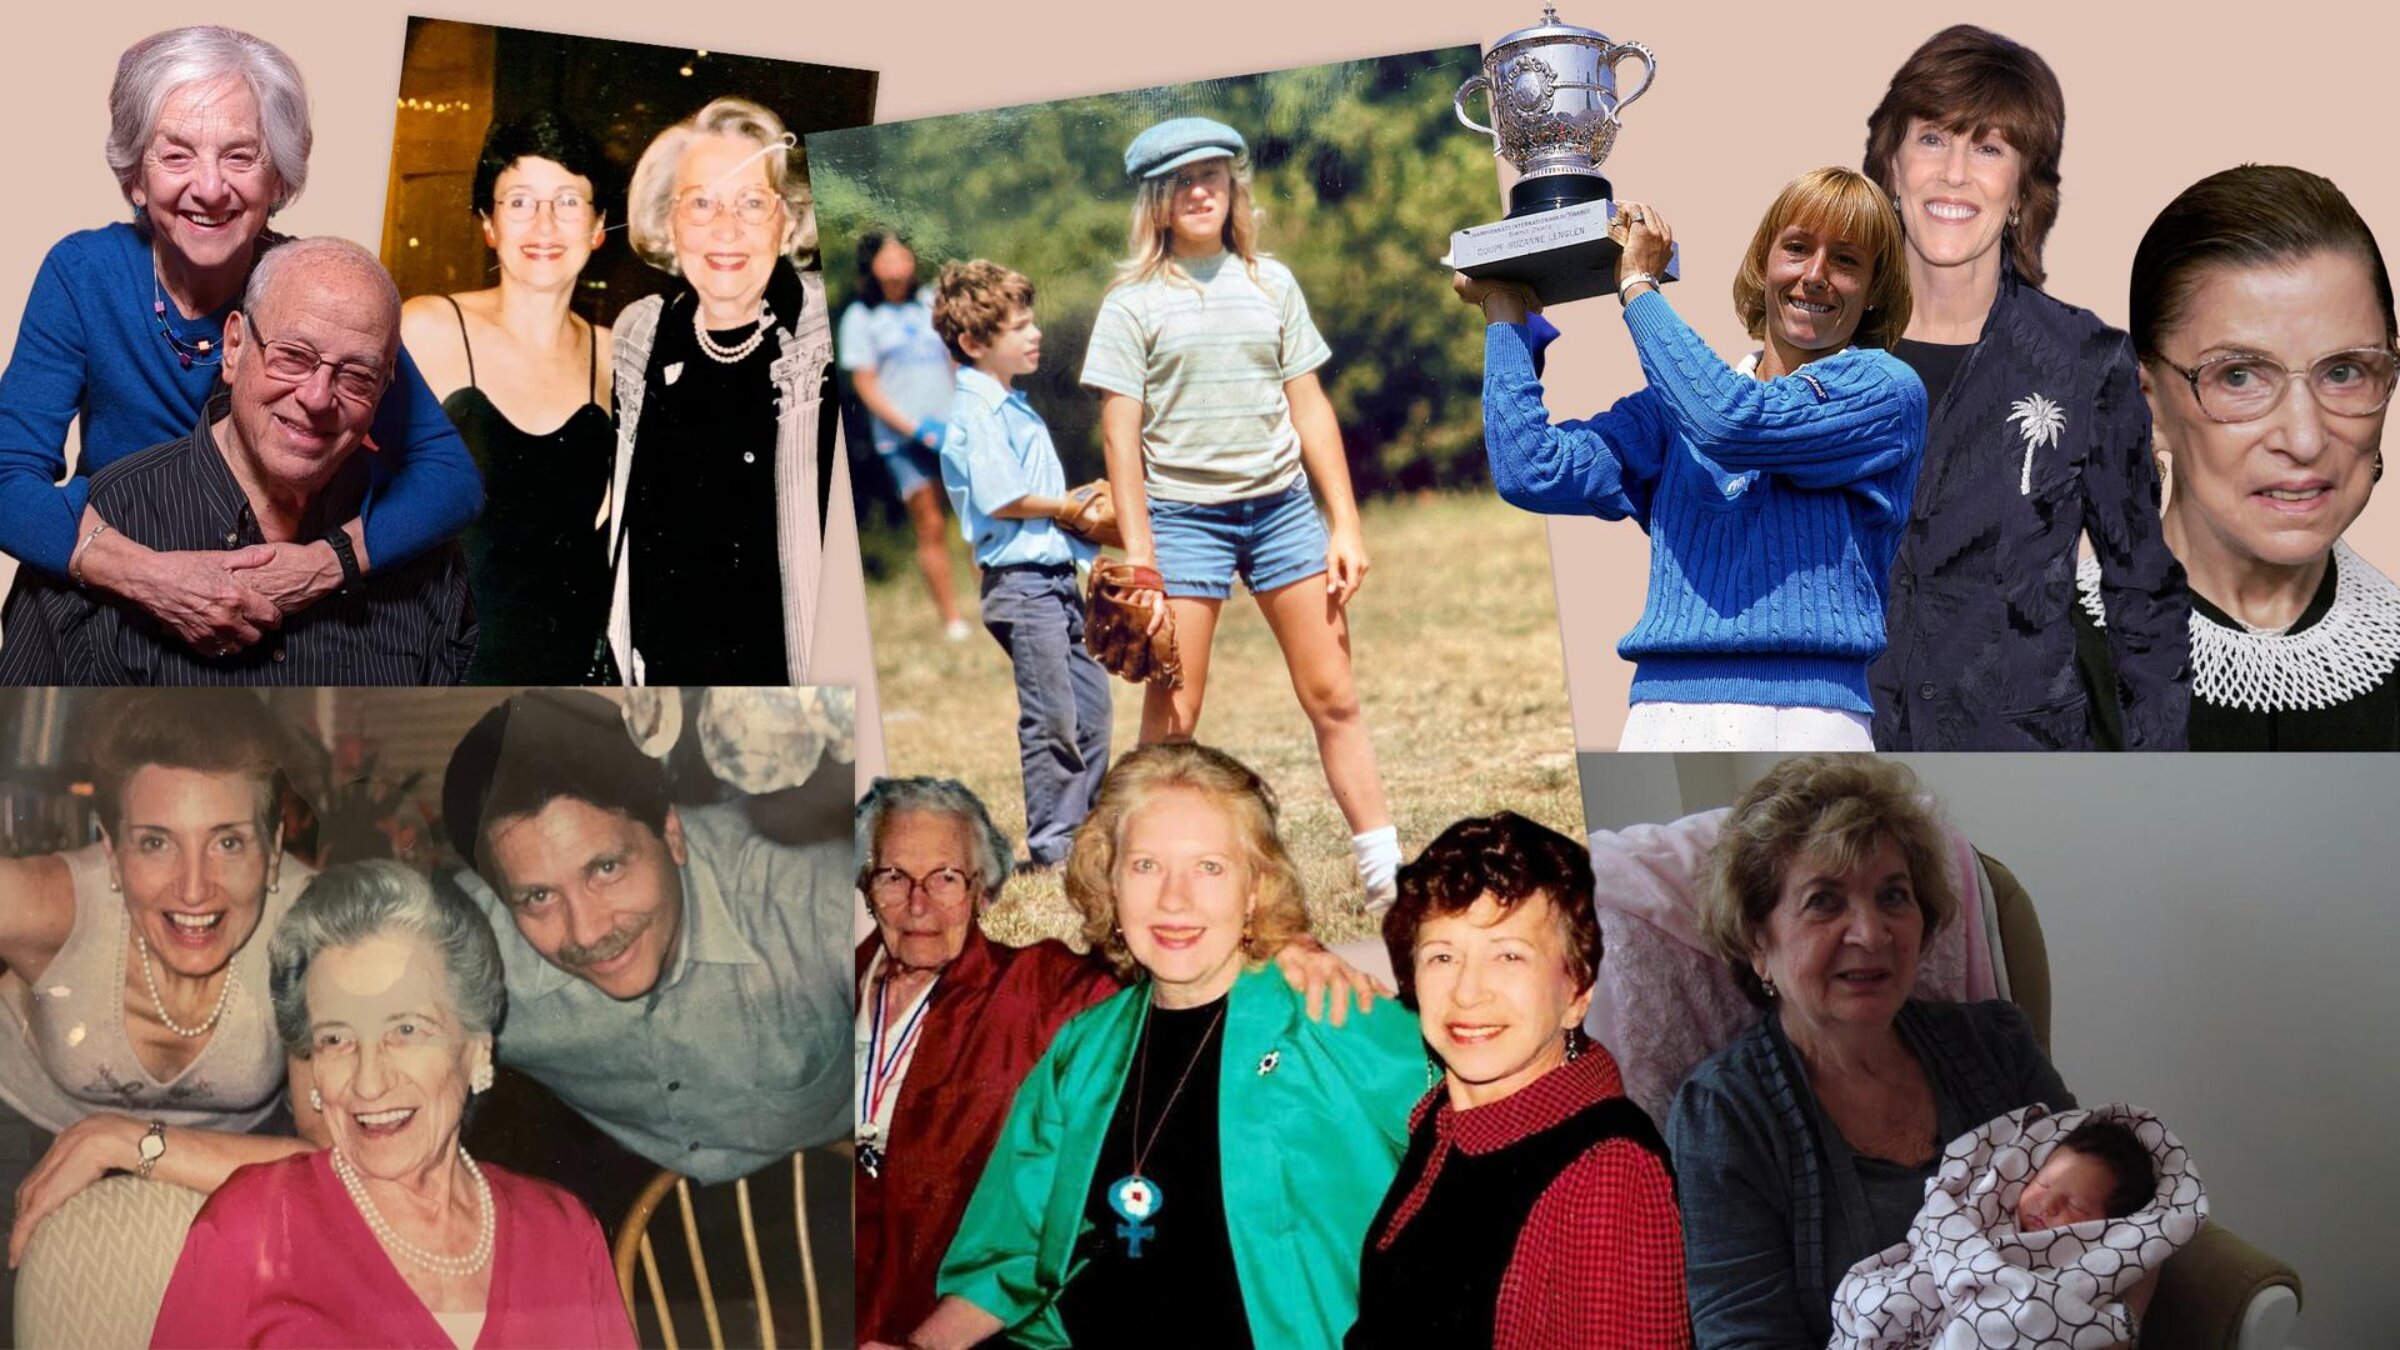 From bottom, counter-clockwise: Dick Goldsmith with his mother, Gertrude Goldsmith; Ida Davidoff, Mary Eastwood and Sonia Pressman Fuentes; Sonia Wasserberger and her great-grandchild, Jordan Jacobs; Ruth Bader Ginsburg; Nora Ephron; Martina Navratilova; Thea Breite; Anita Emmerich Hyman and her daughter Judith Darsky; Ira and Rona Kellman. (Photos courtesy of friends and family and by Michael Loccisano, Mark Wilson and Steve Powell/Allsport via Getty Images. Collage by Matthew Litman)